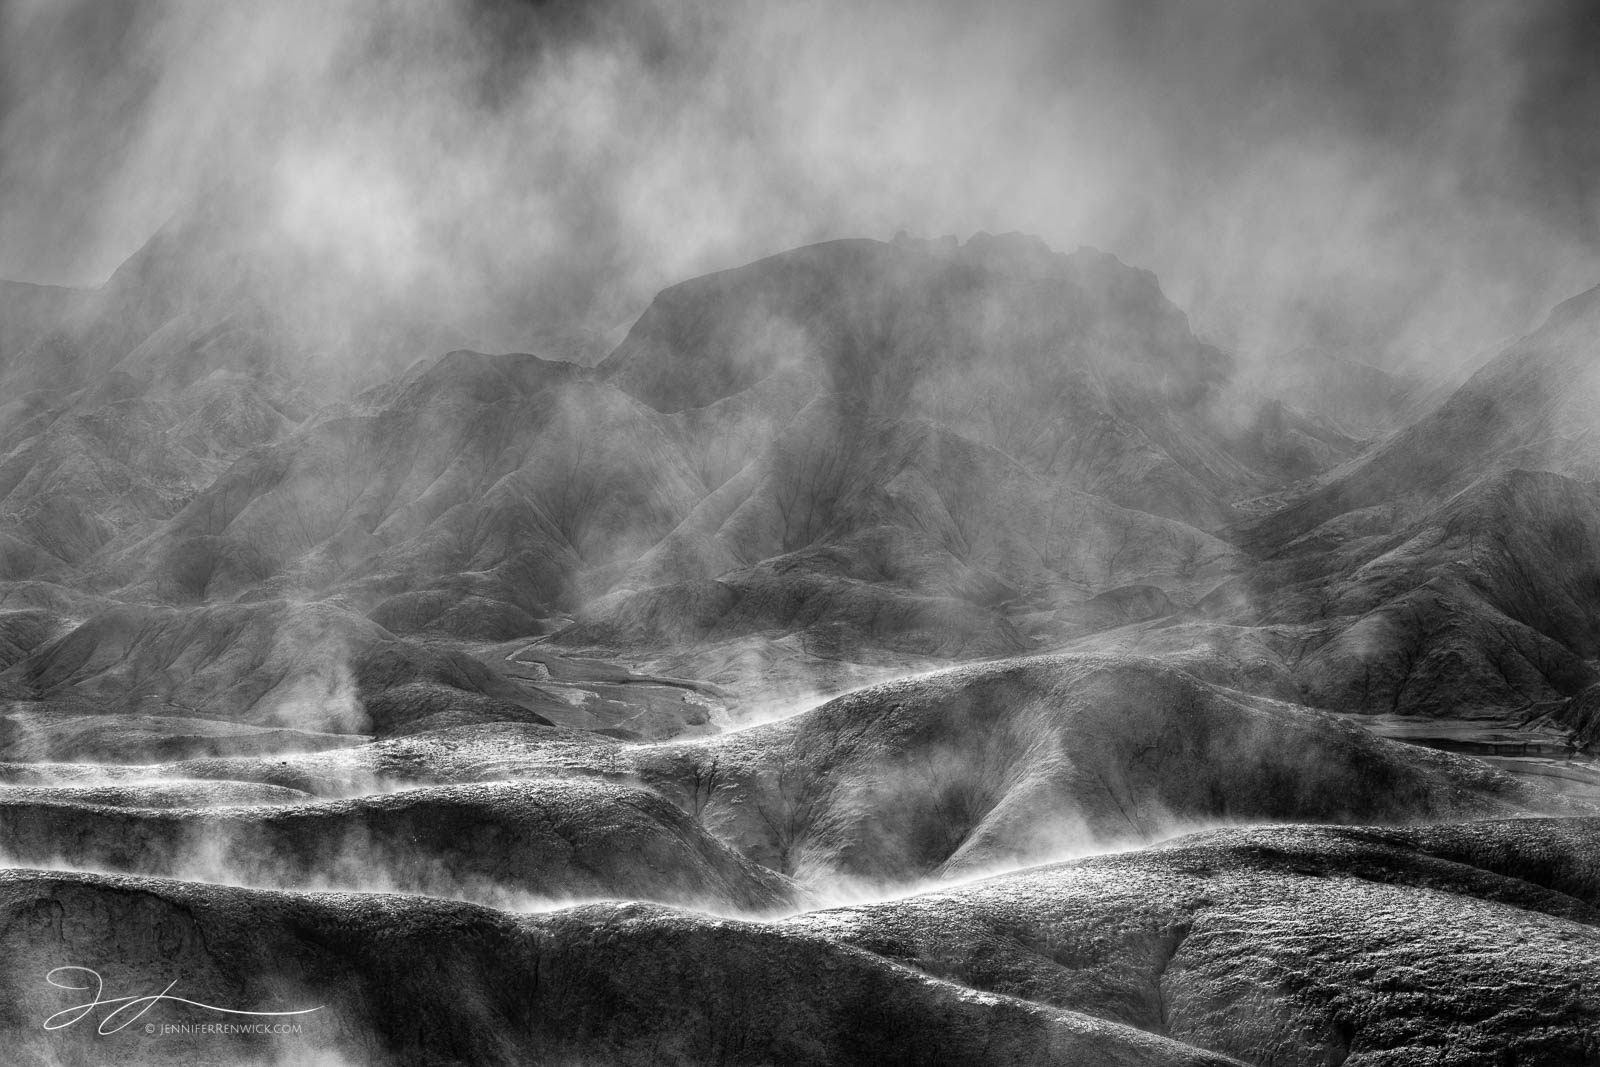 Sun highlights the ridges of the badlands in Death Valley National Park while the fog clears.  This image is part of my "Spirits...